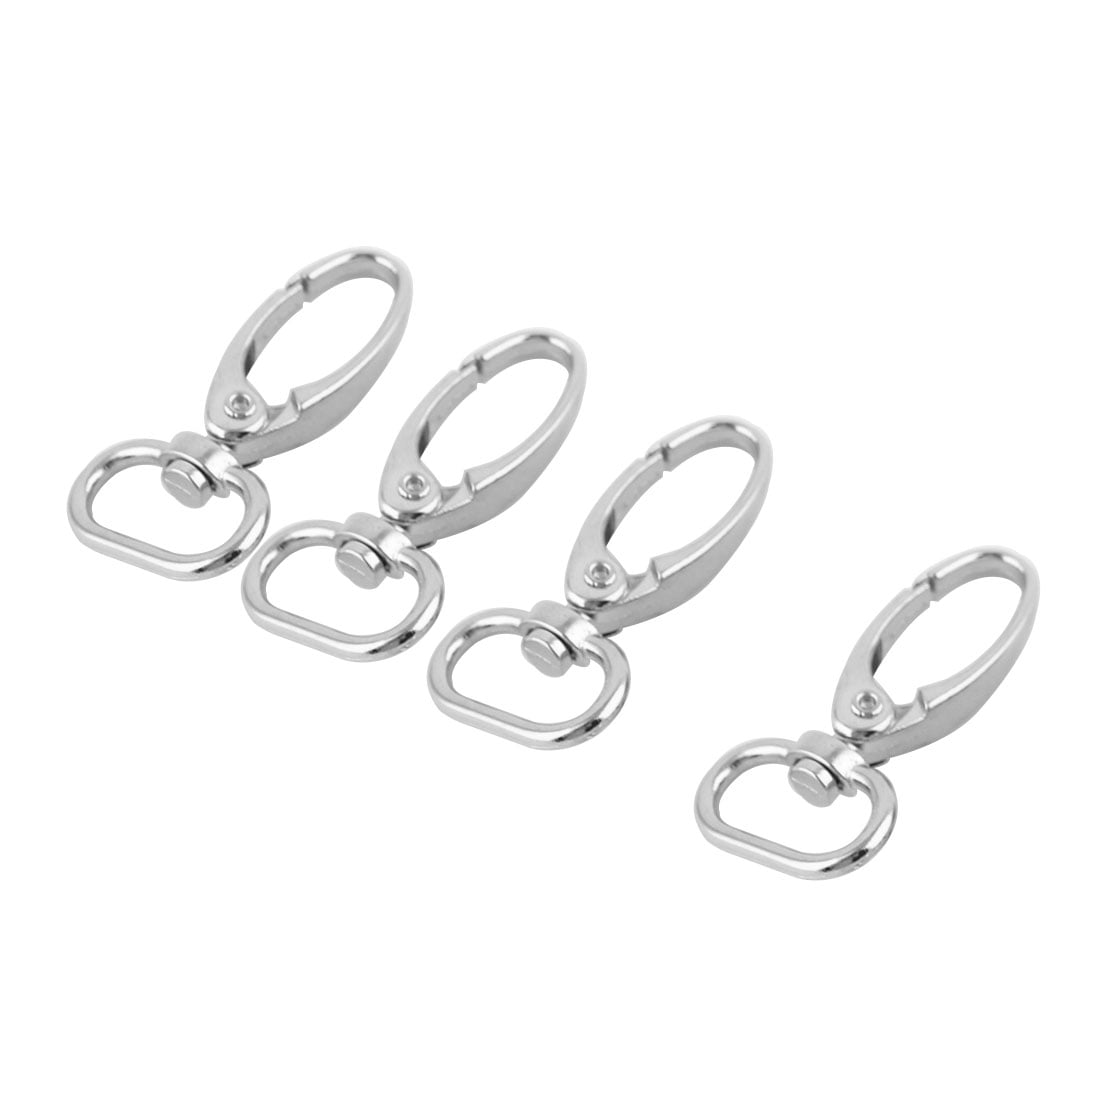 Metal Swivel Lanyard Snap Hook Lobster Claw Clasp Clips Silver